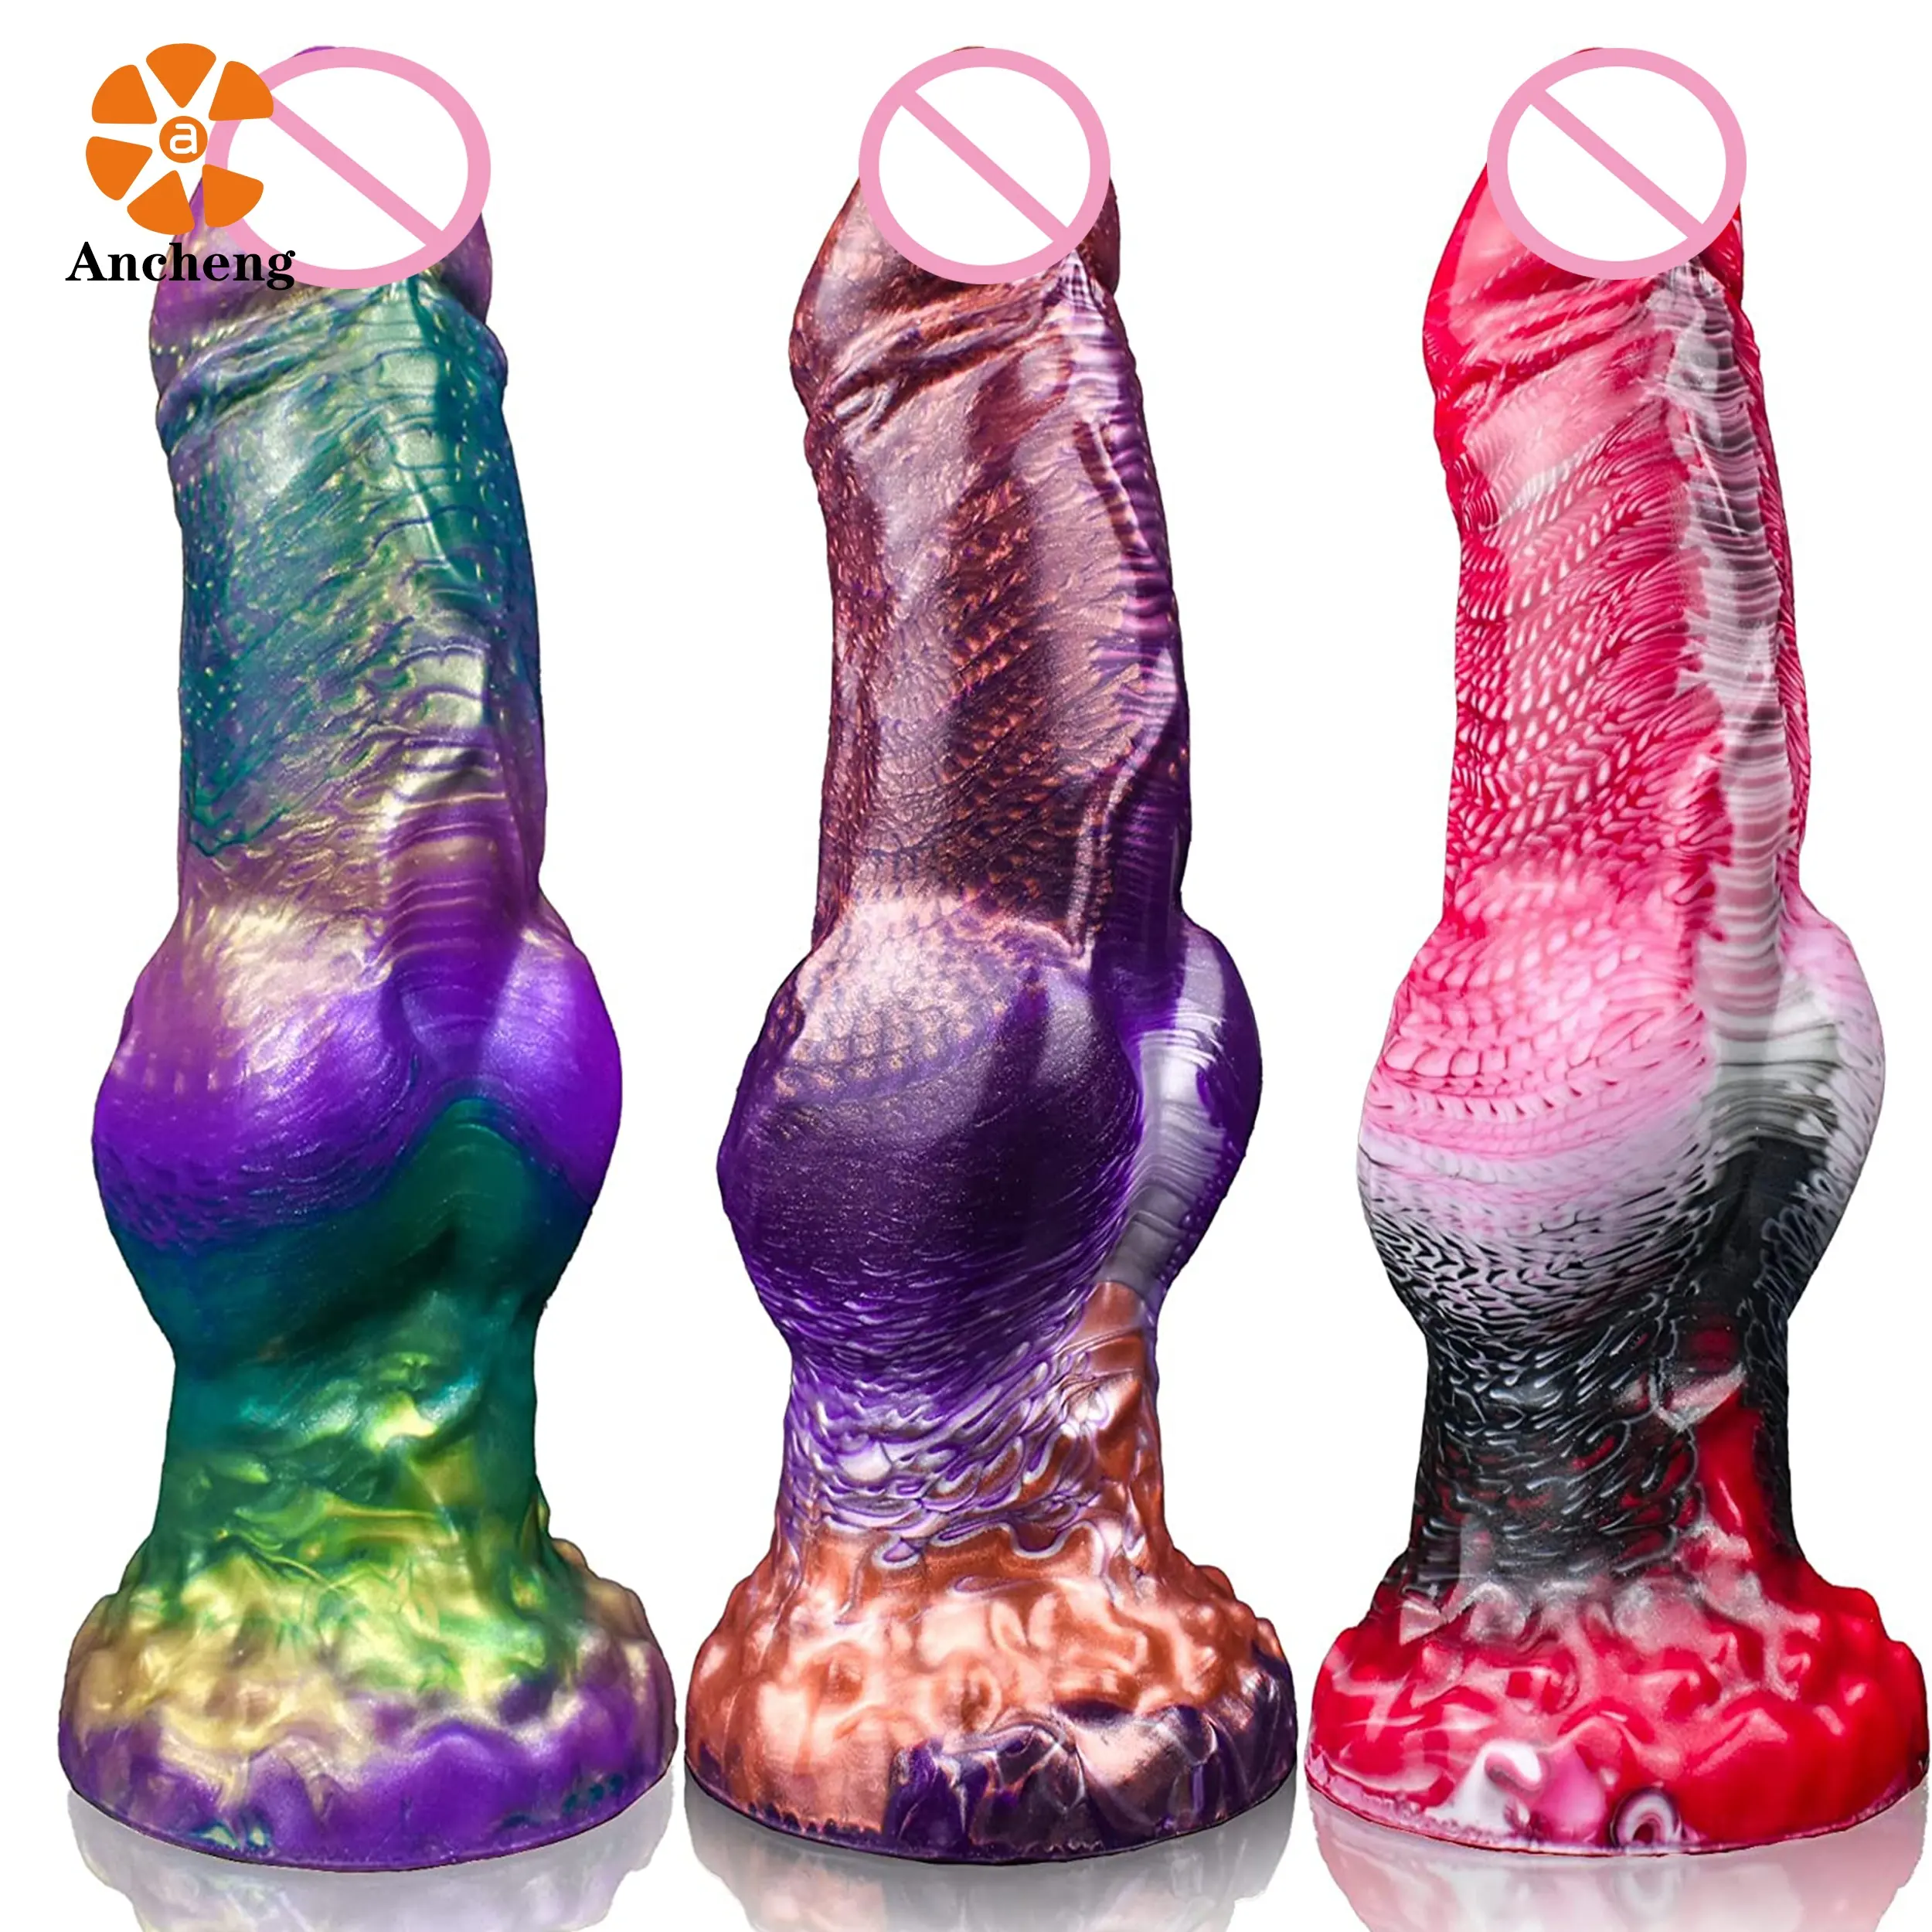 Hot New 9" Realistic Silicone Wolf Dildo with Big Knot Giant Anal Plug Toy Fantasy G Spot Dragon Dildo Sex Toy for Vagina